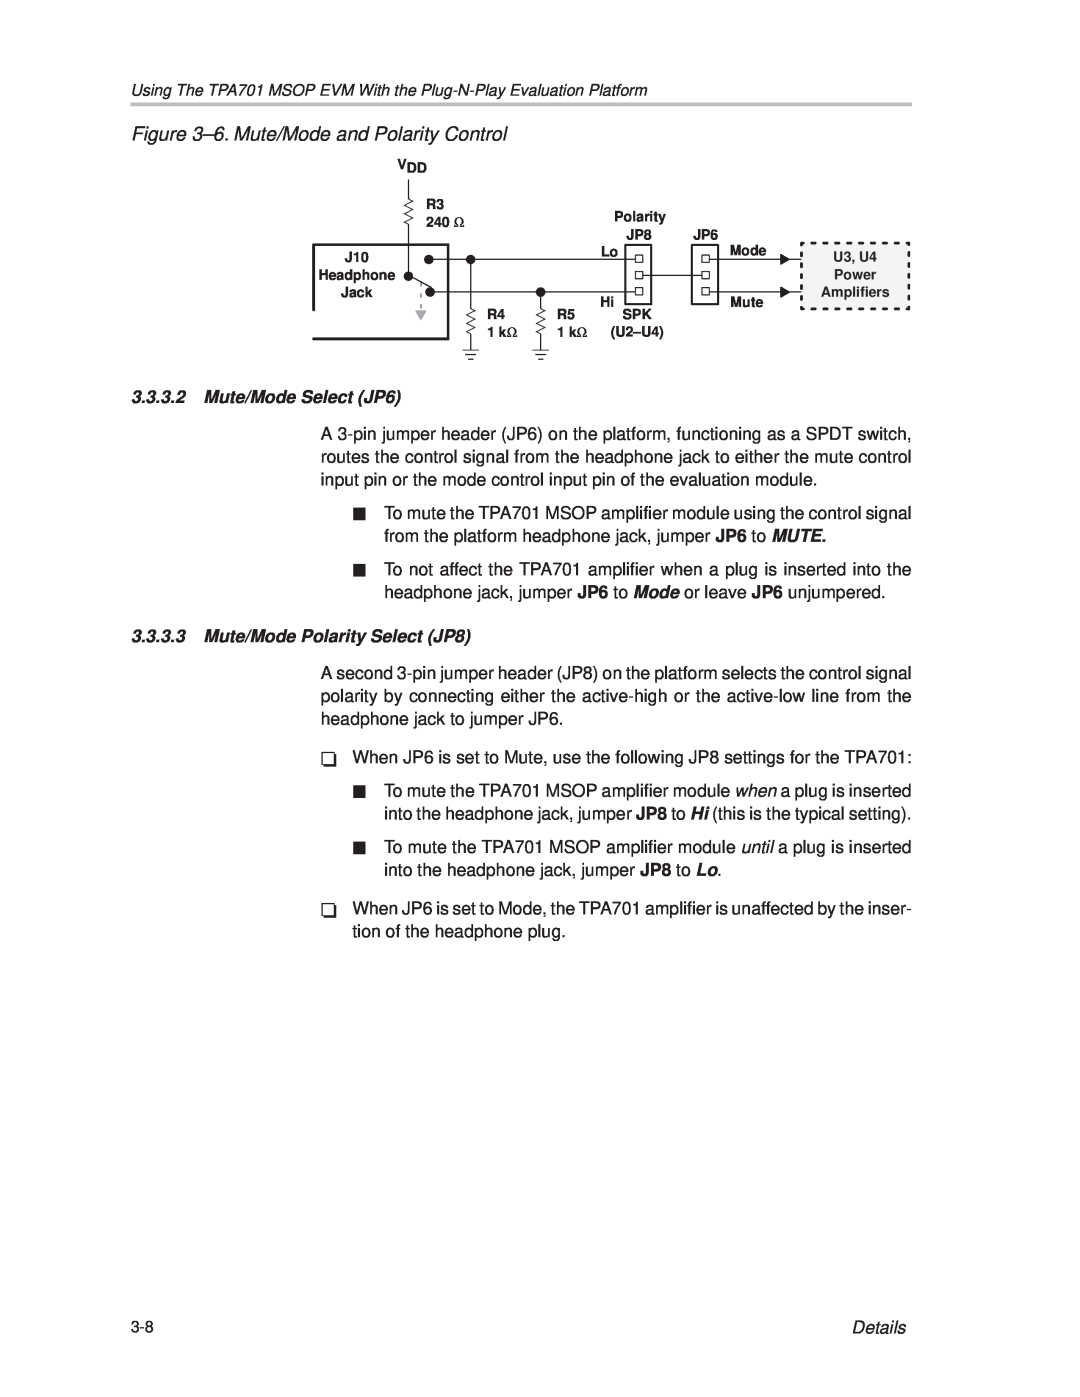 Texas Instruments TPA701 manual ±6. Mute/Mode and Polarity Control, 3.3.3.2Mute/Mode Select JP6, Details 